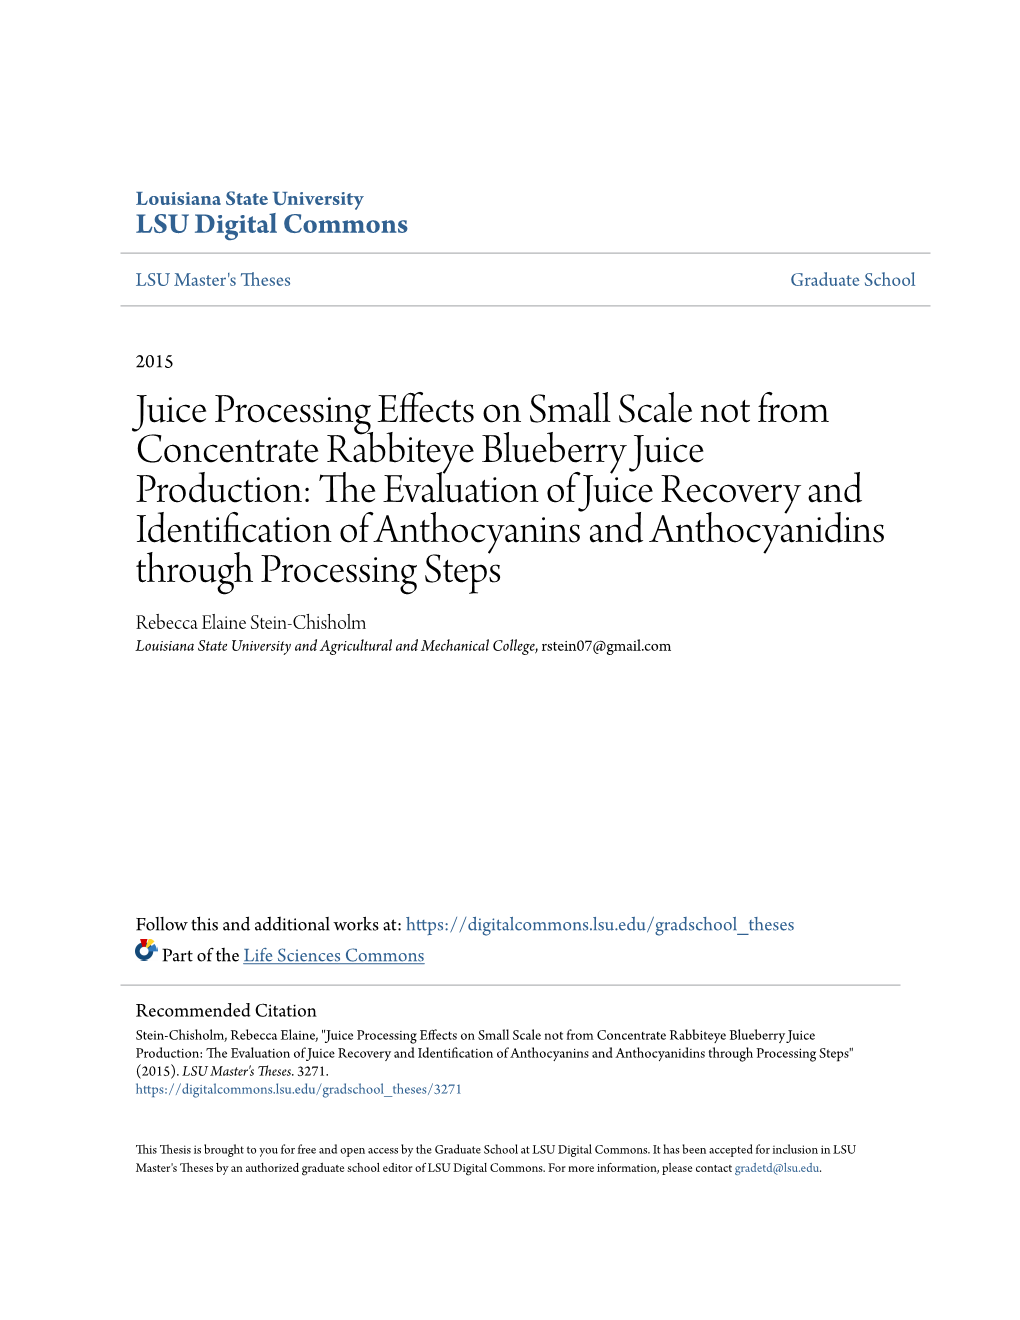 Juice Processing Effects on Small Scale Not from Concentrate Rabbiteye Blueberry Juice Production: the Evaluation of Juice Recov